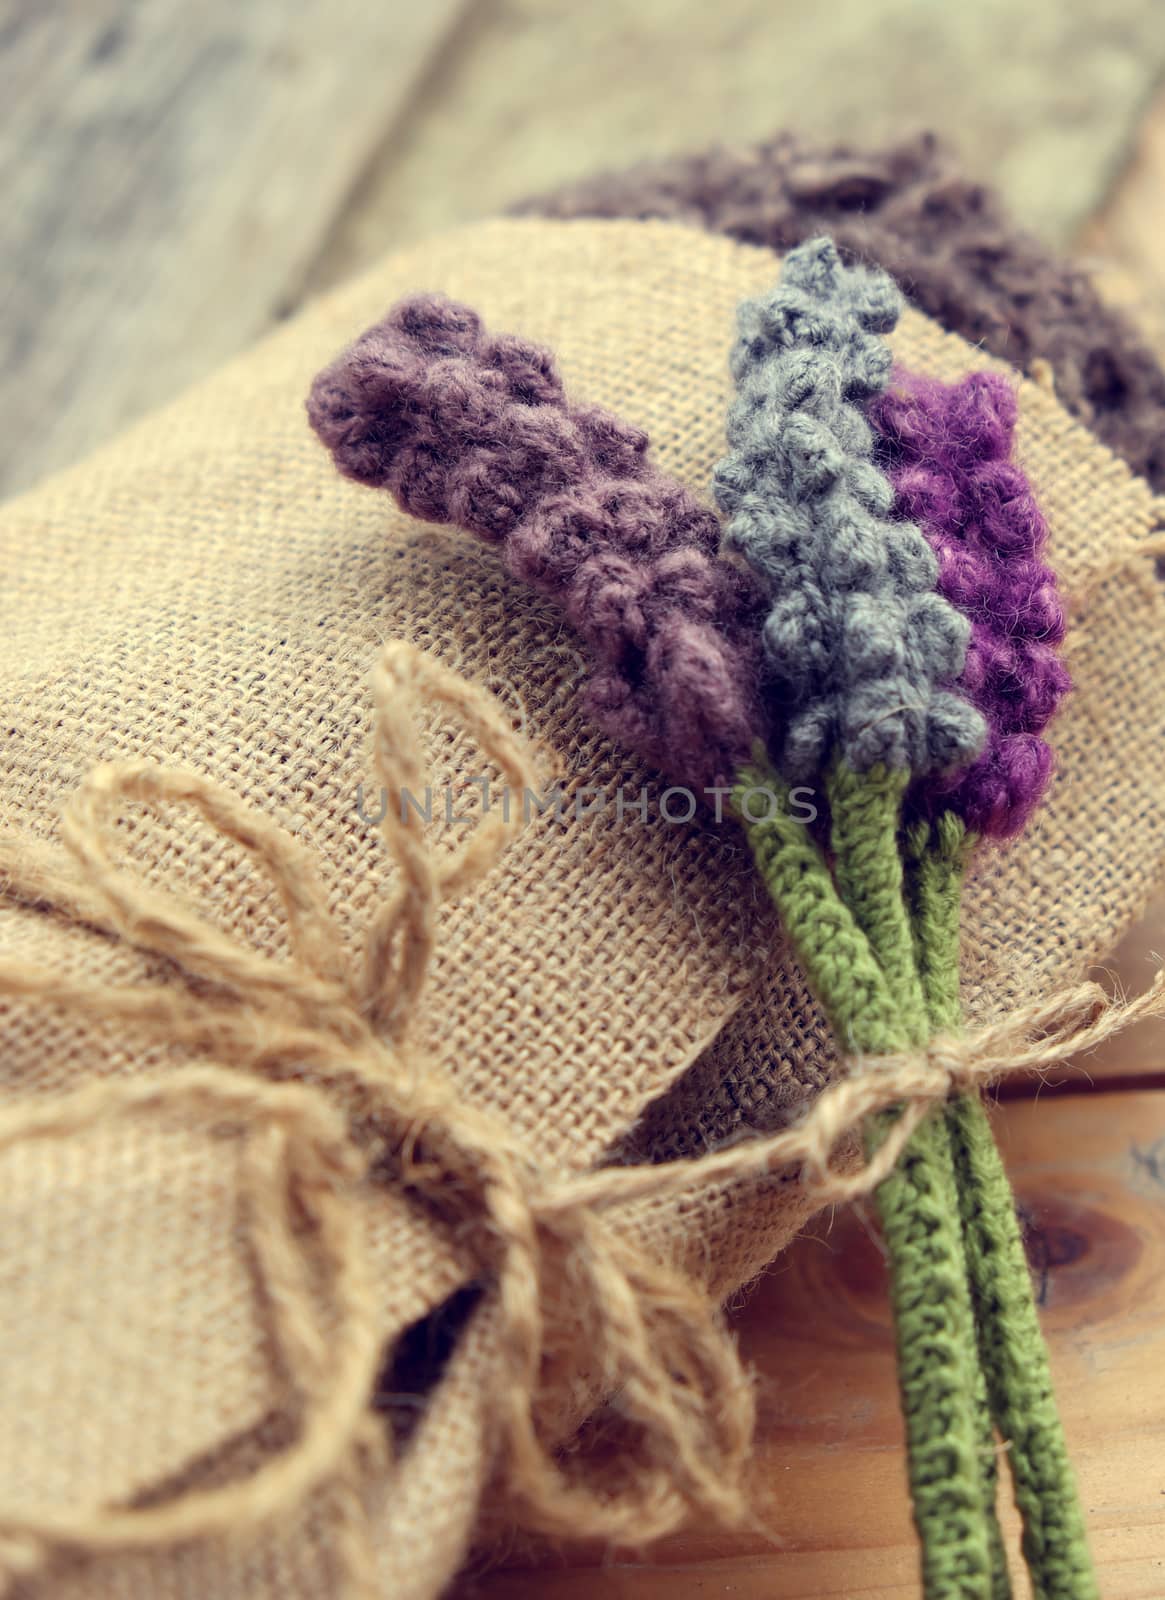 Handmade gift, knitted lavender flower by xuanhuongho